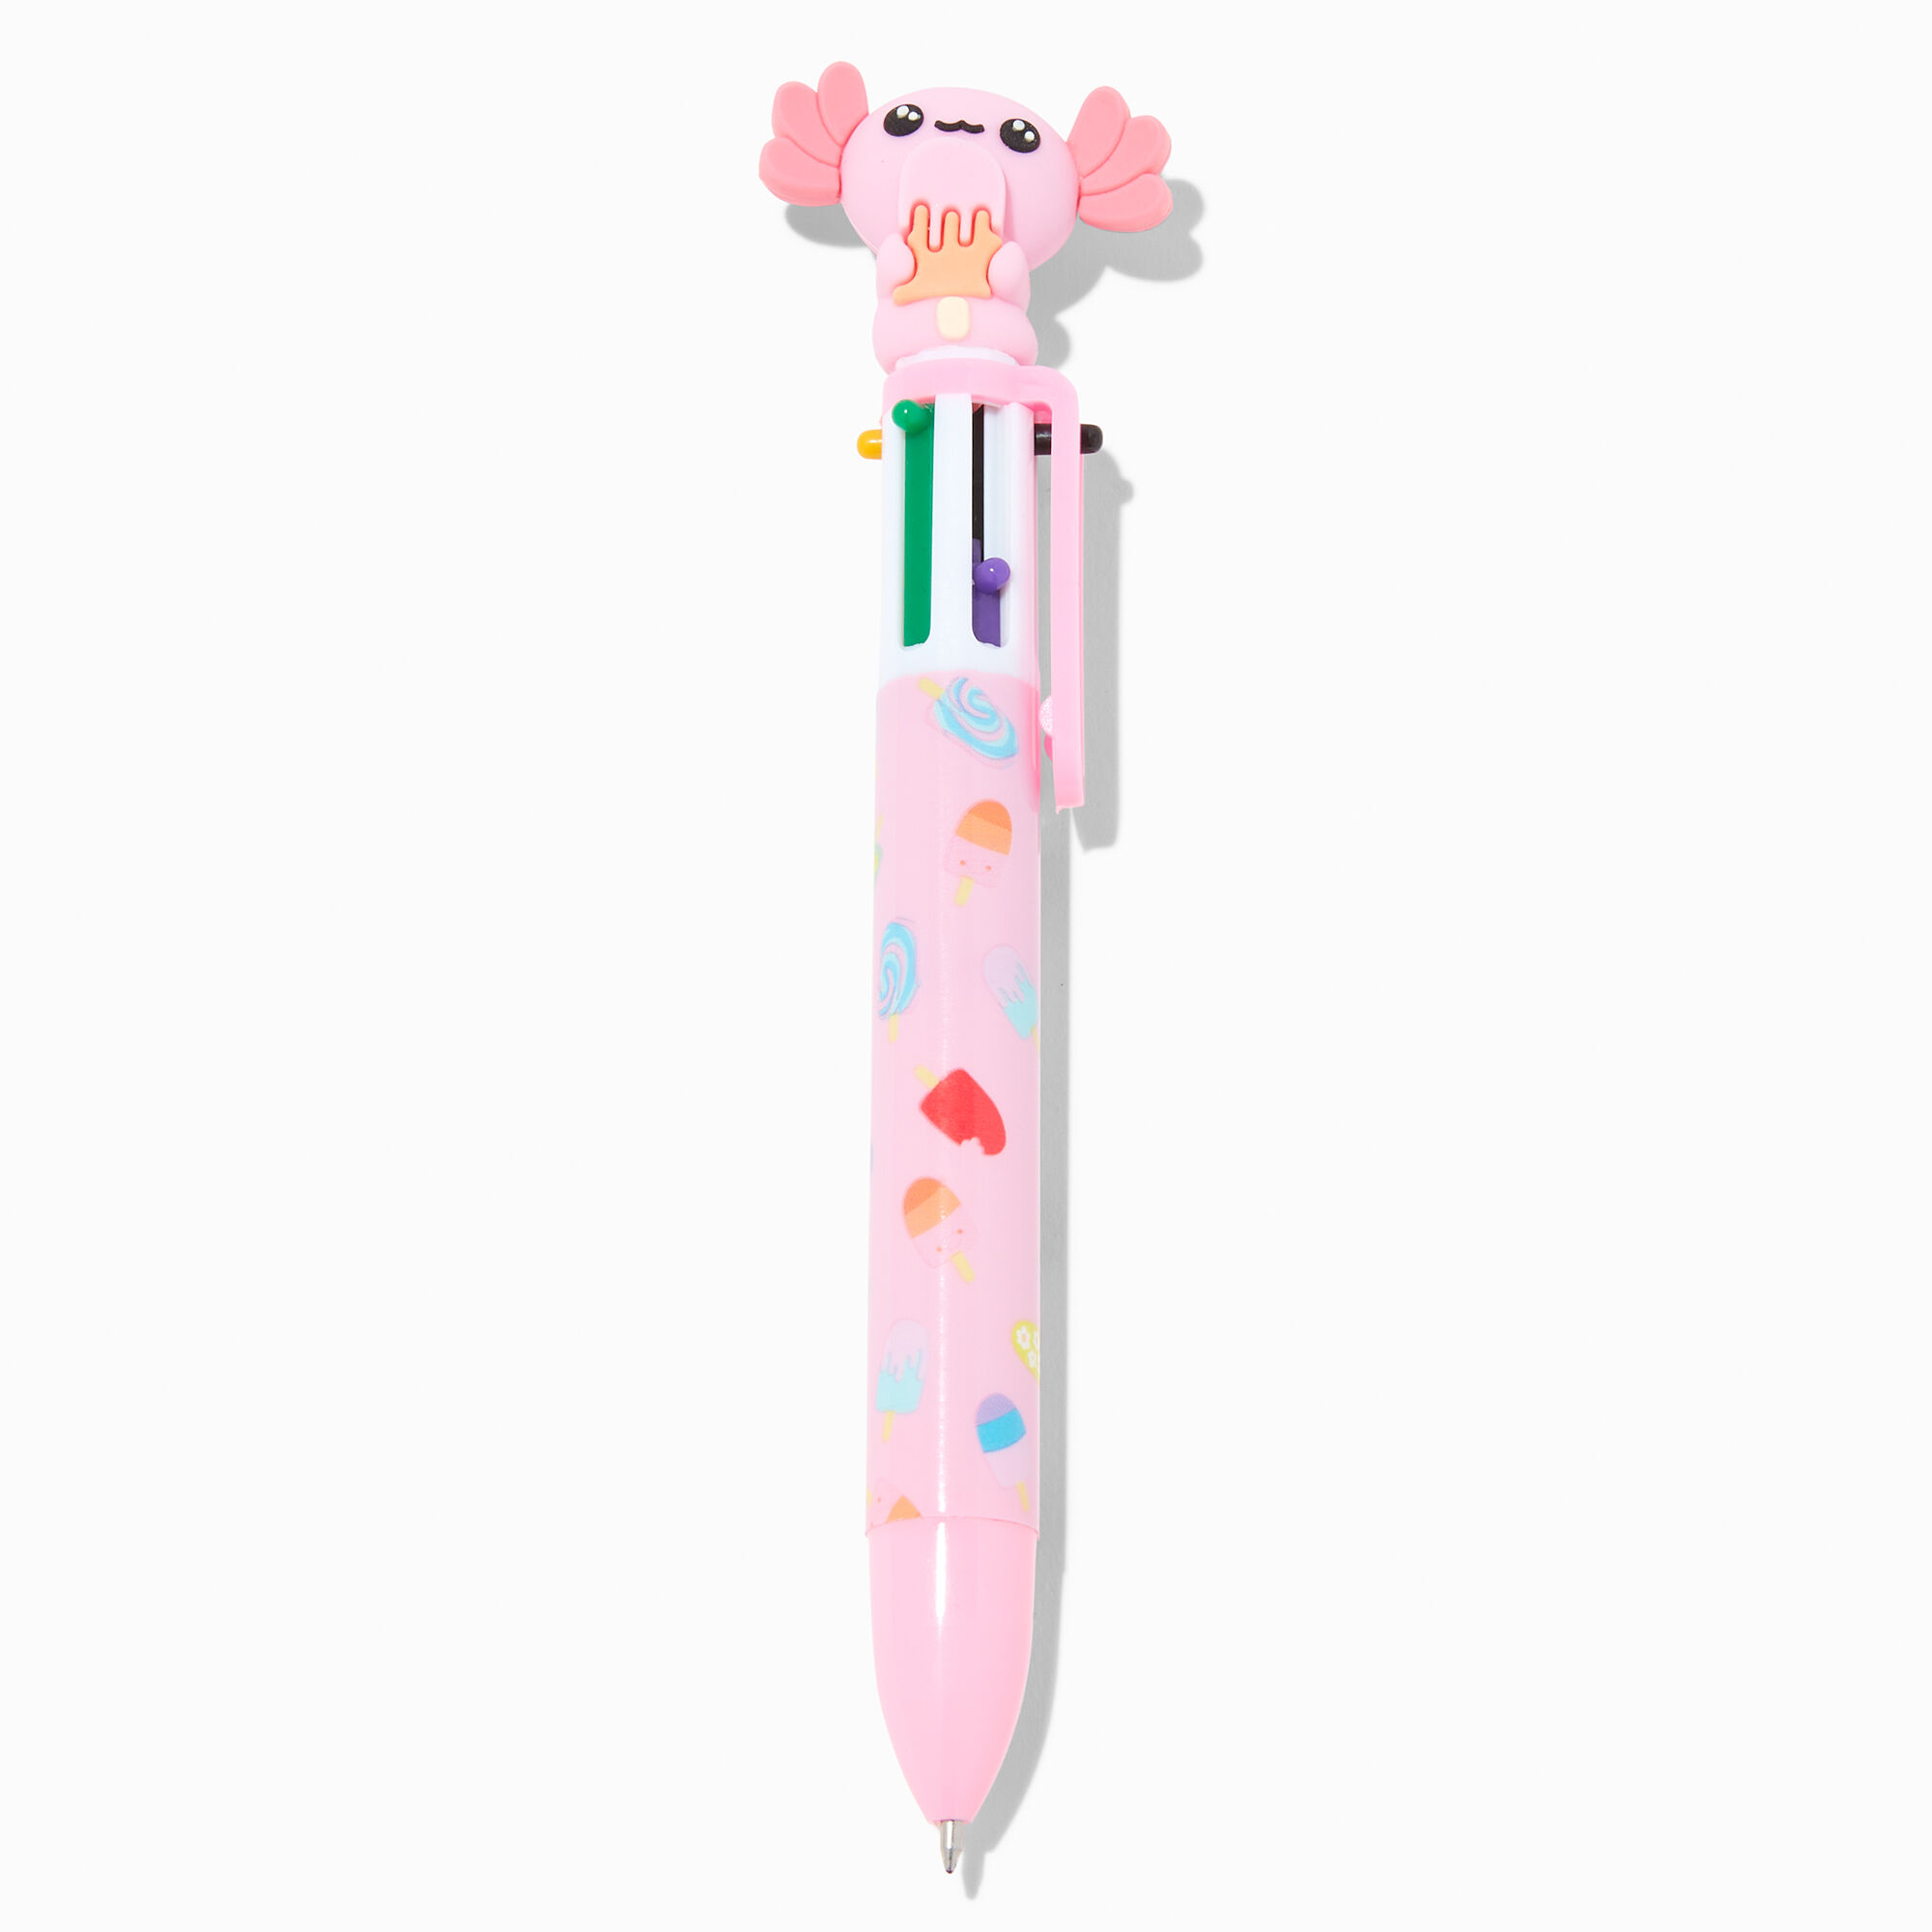 View Claires Axolotl Multicolored Pen Pink information